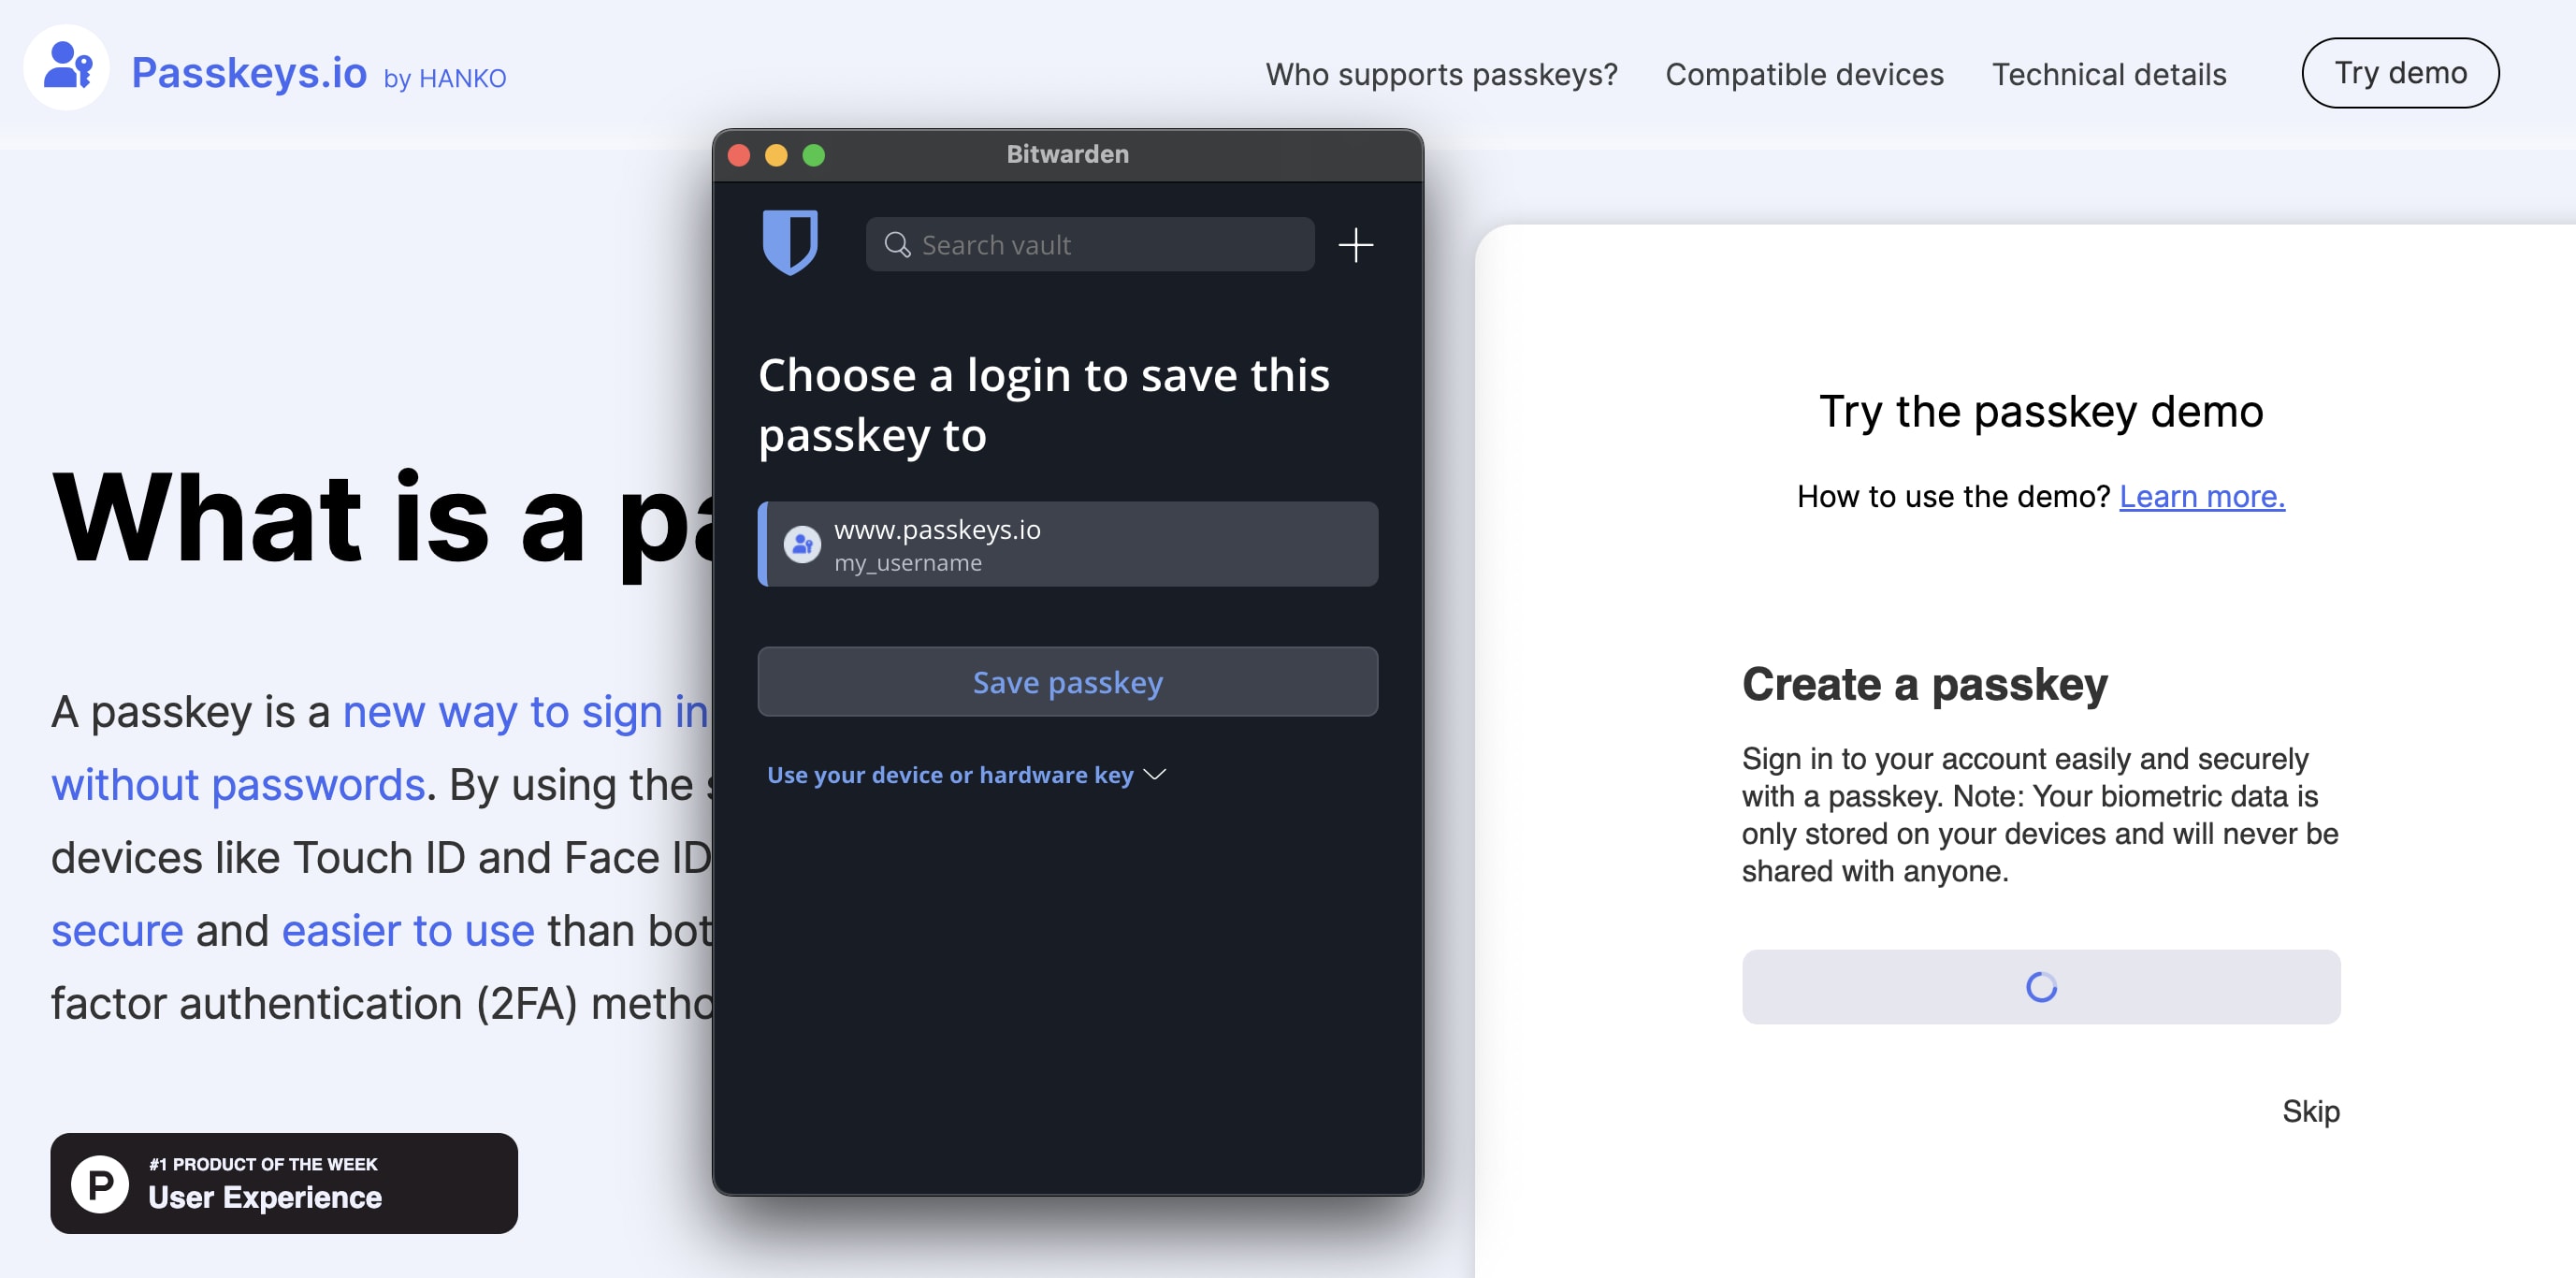 Save passkey with existing login